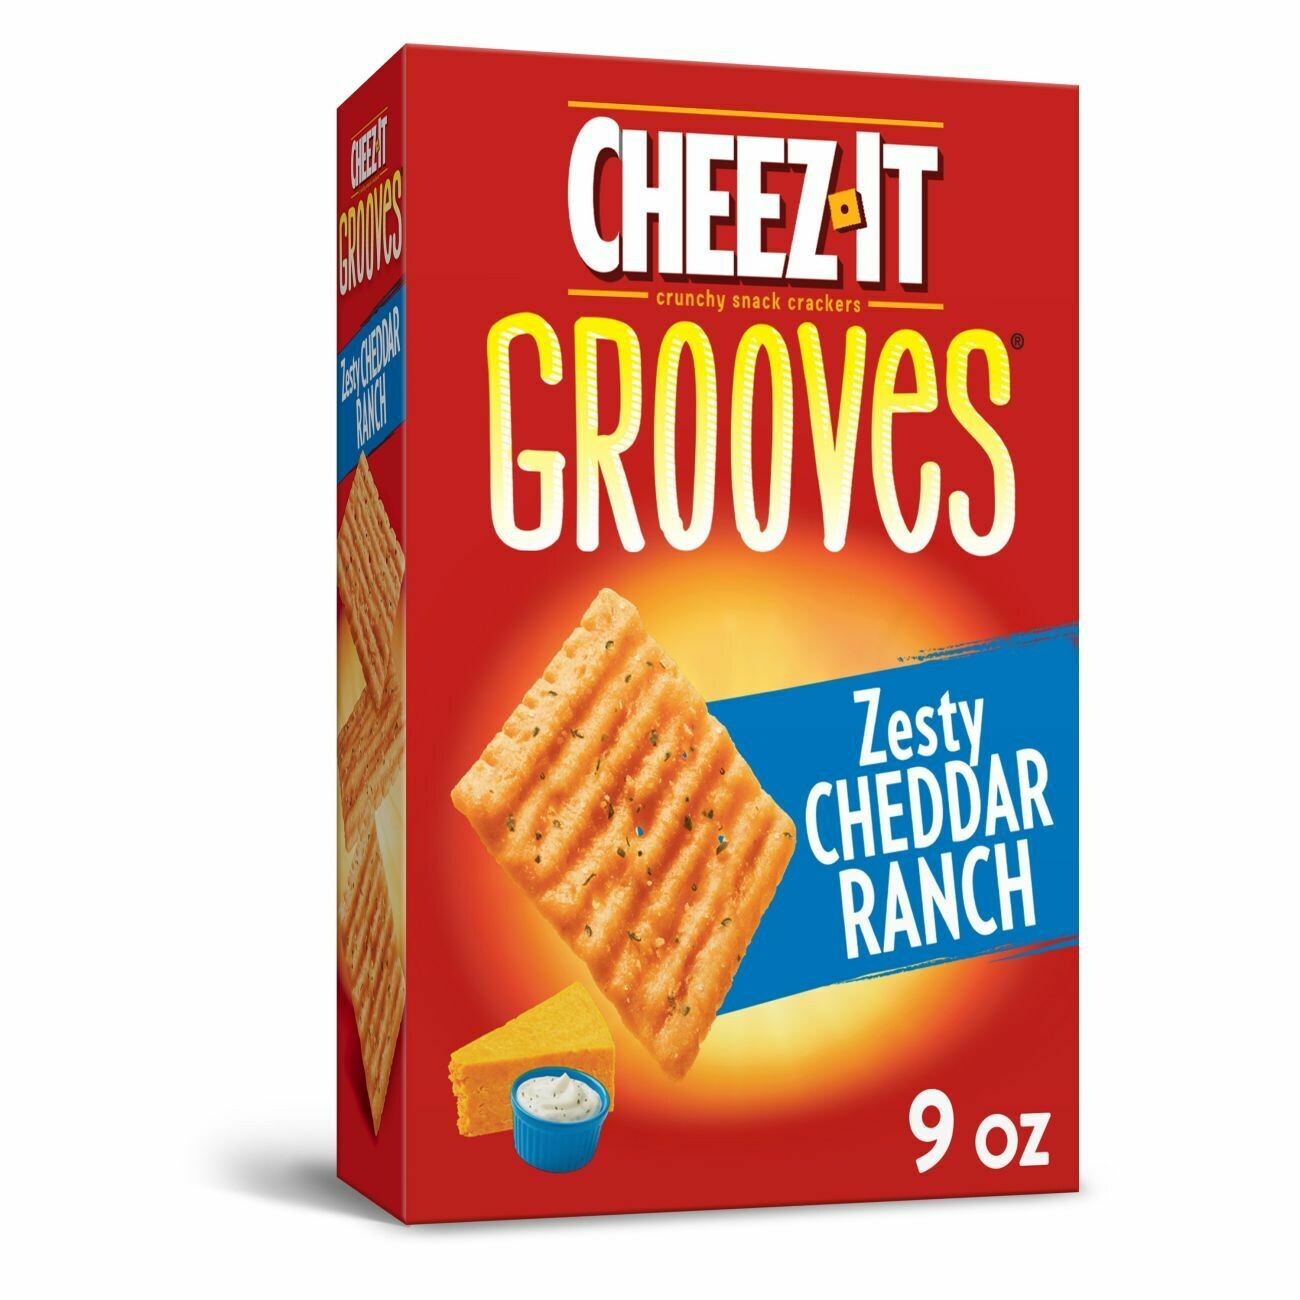 Cheez It Boxes     Grooves Zesty Cheddar Ranch